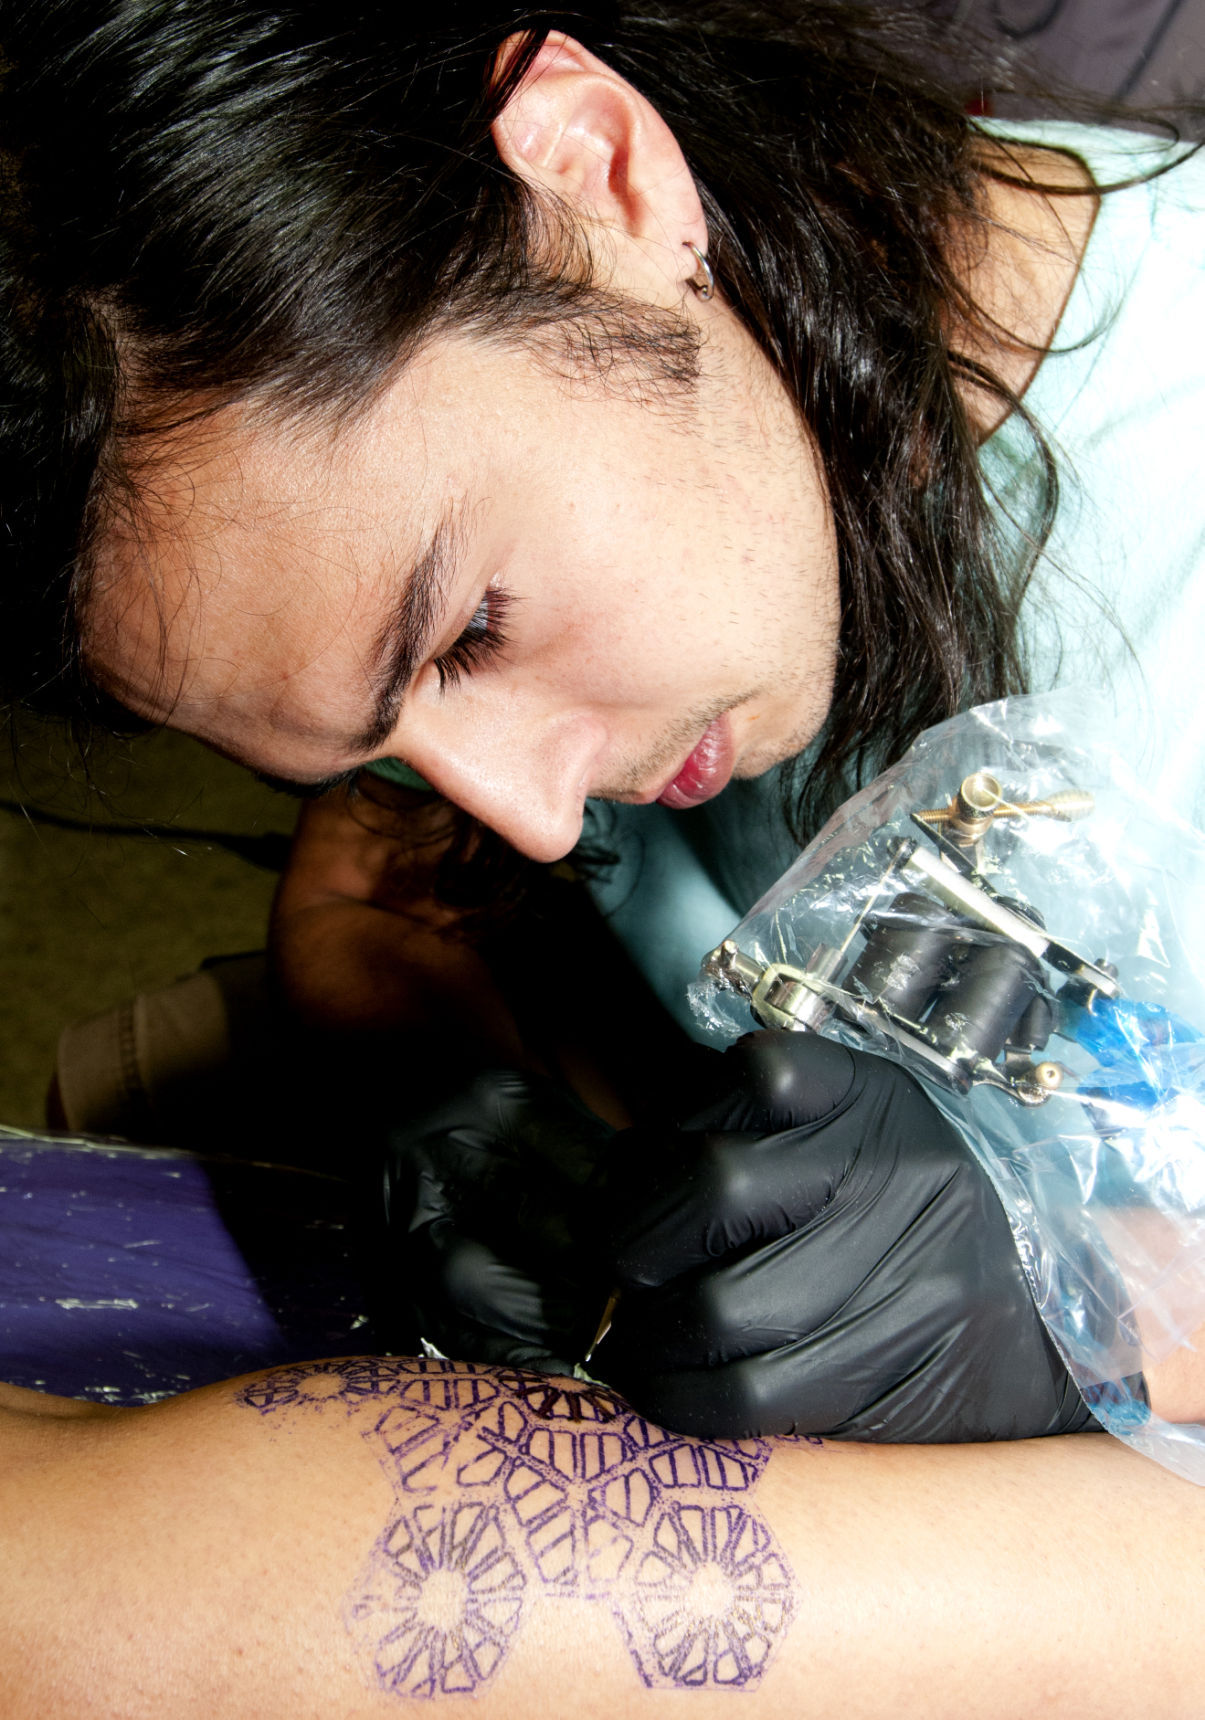 Tattoo Culture in Cape Town, We're Talking Tattoos, Parlours and Ink Shops,  Prison-Tattoos and Body Modification